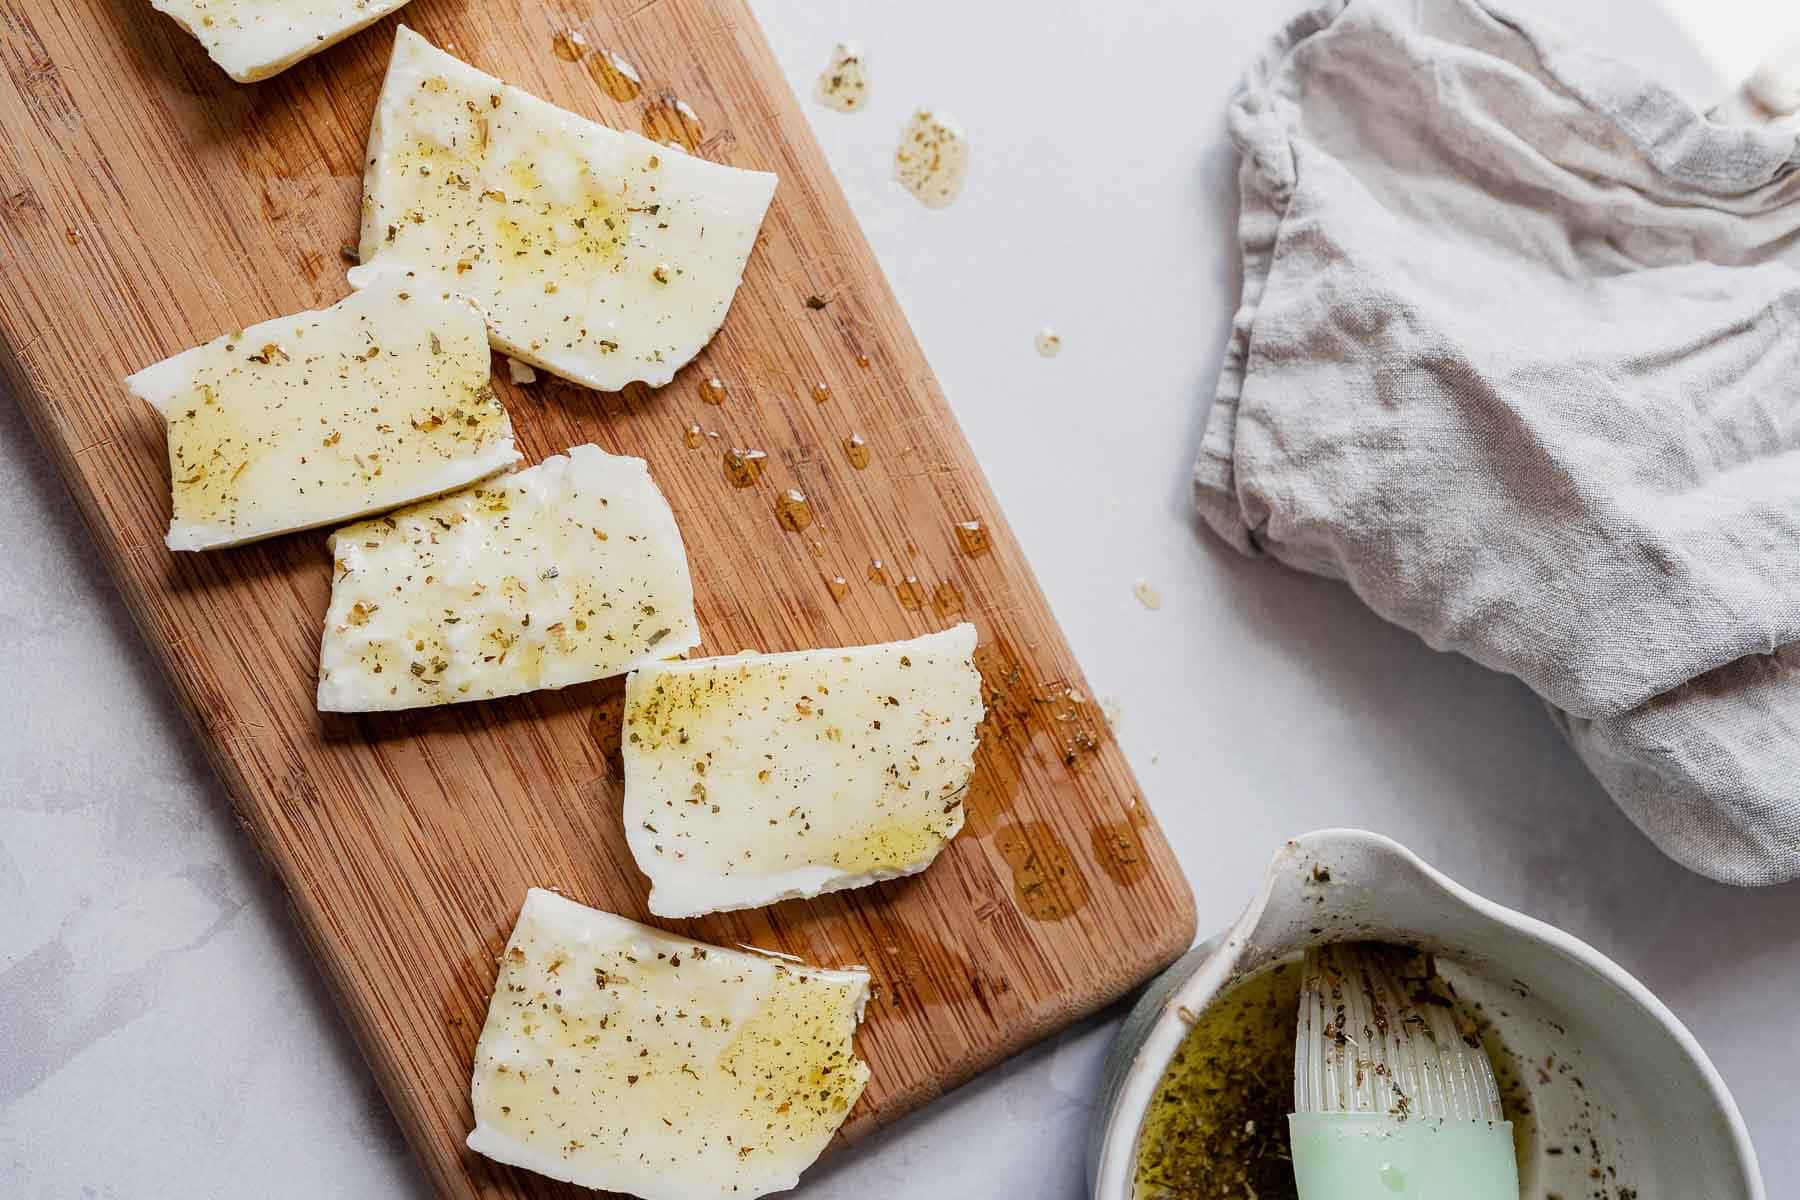 Slices of white cheese drizzled with oil rest on a small wooden cutting board.